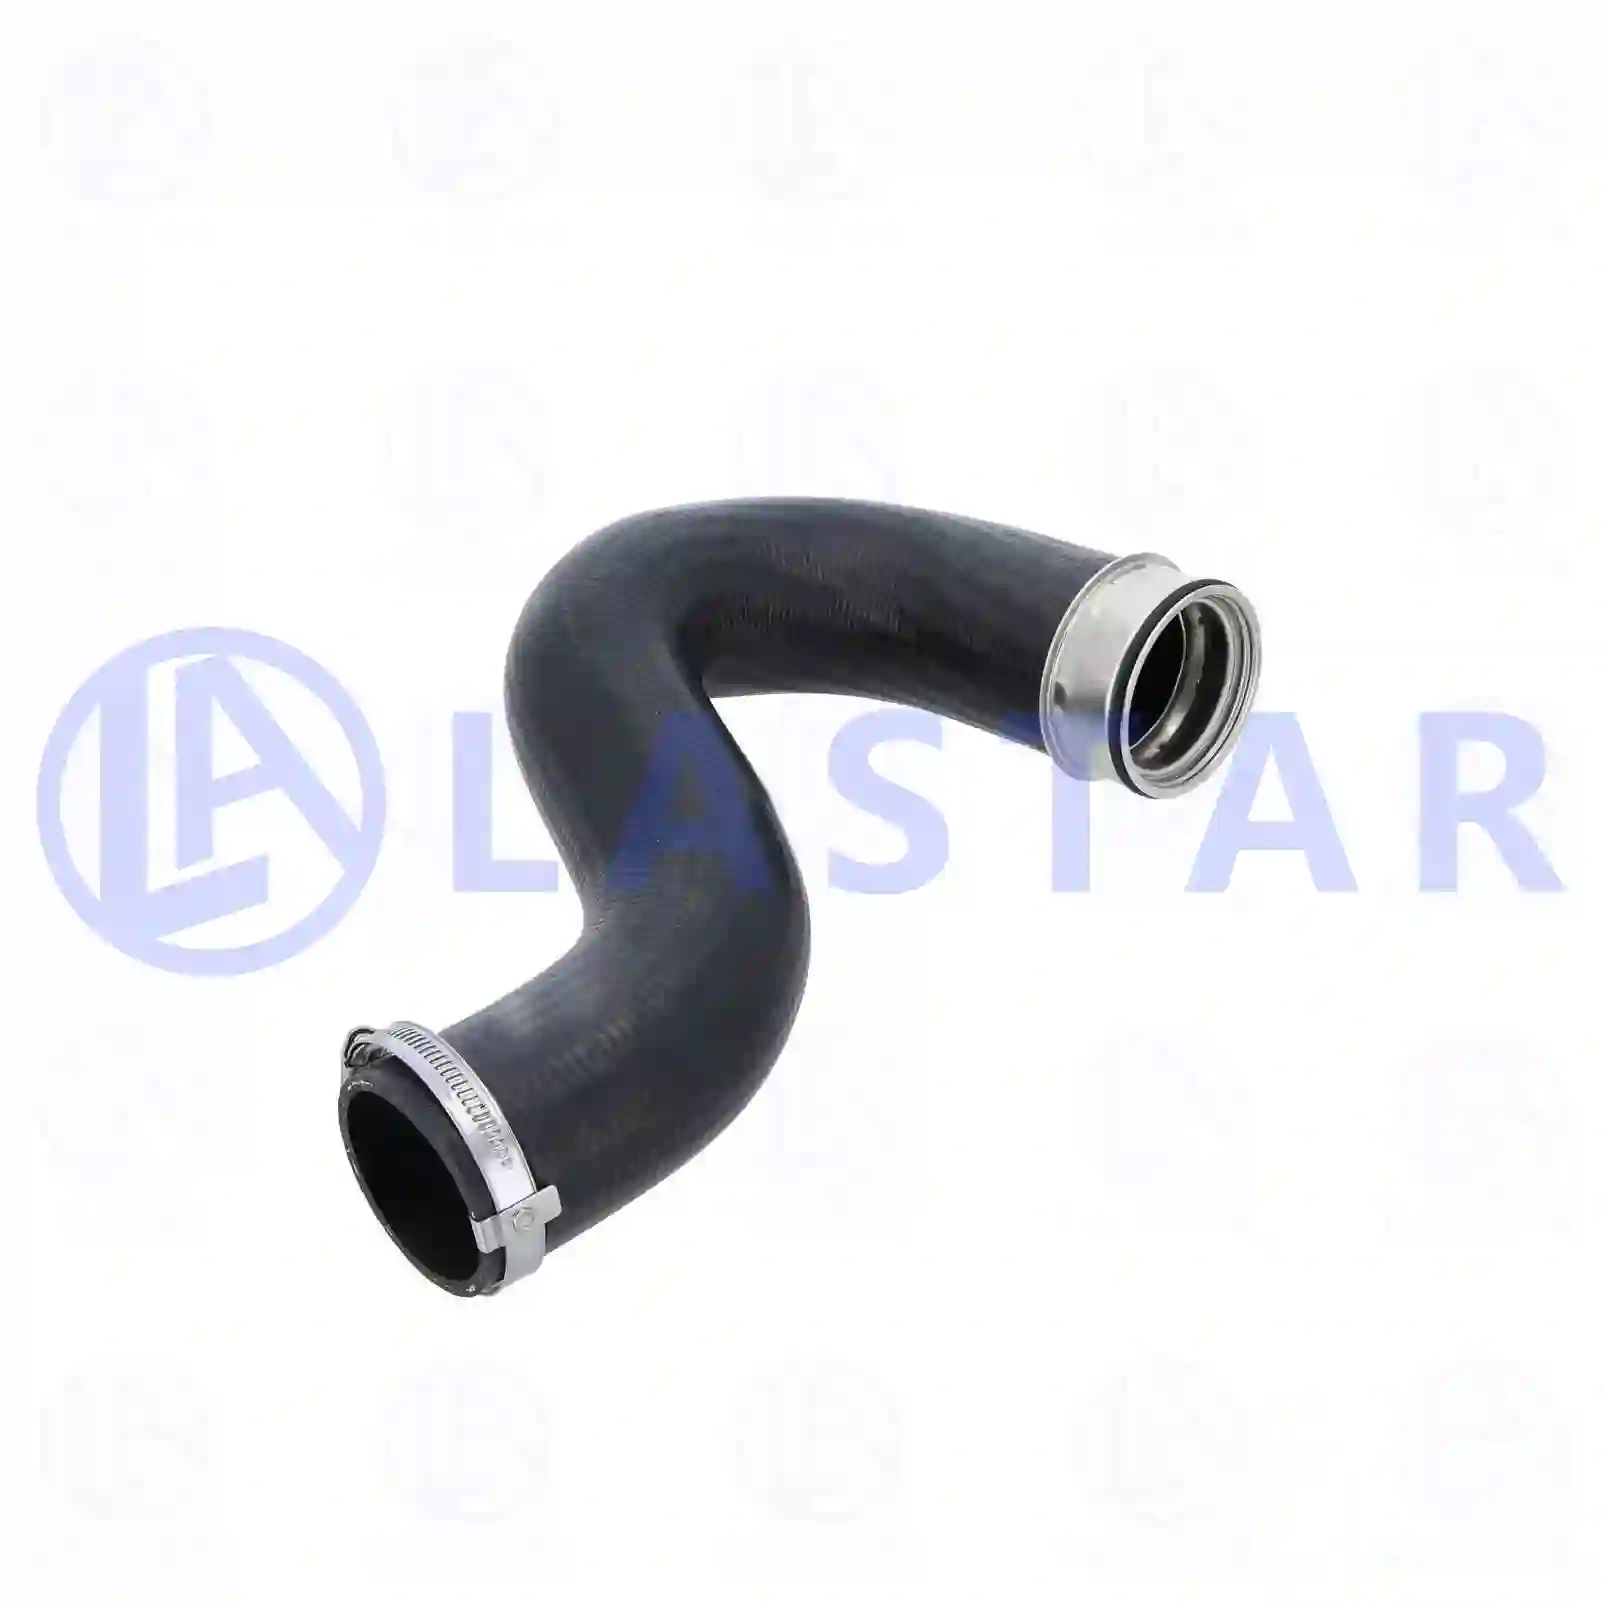 Charge air hose, 77708405, 68013652AA, 68047331AA, 9065280282, 9065282282 ||  77708405 Lastar Spare Part | Truck Spare Parts, Auotomotive Spare Parts Charge air hose, 77708405, 68013652AA, 68047331AA, 9065280282, 9065282282 ||  77708405 Lastar Spare Part | Truck Spare Parts, Auotomotive Spare Parts